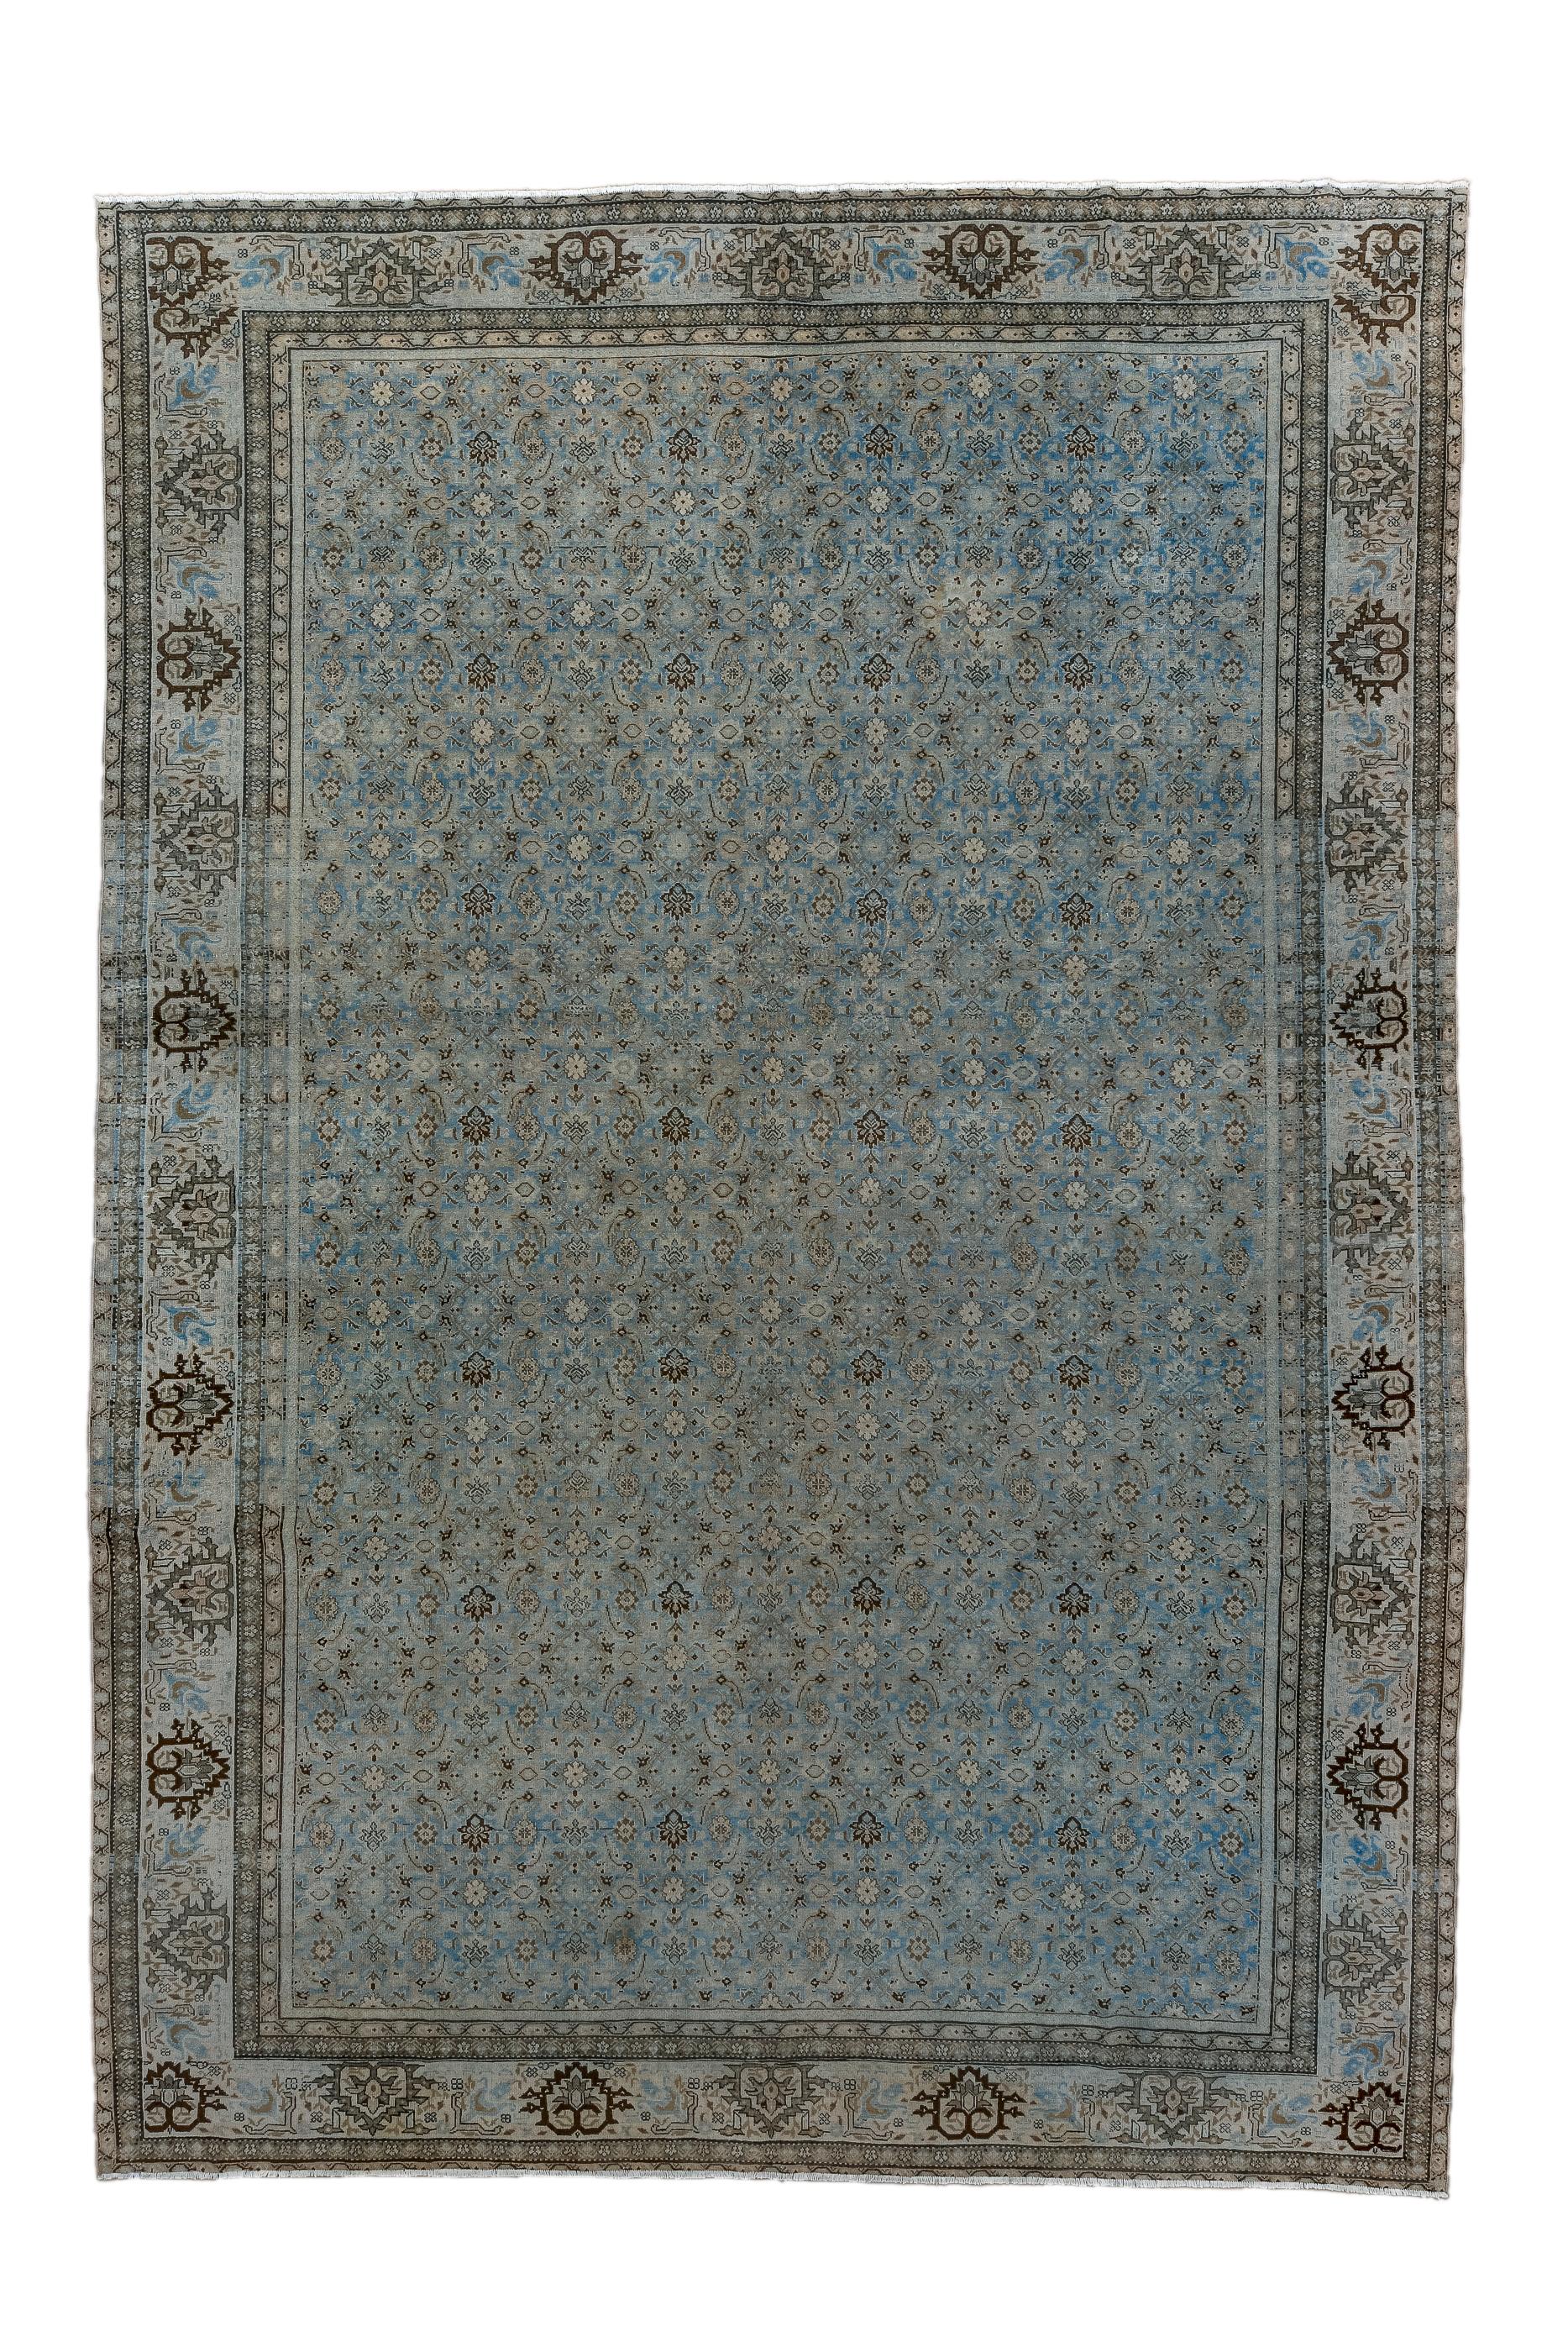 The light blue-grey ground supports a balanced small allover Herati design with ecru and near black occasional accents.  The sand border features reversals of ragged and partially stepped open palmettes. Good condition, moderate/medium weave, on